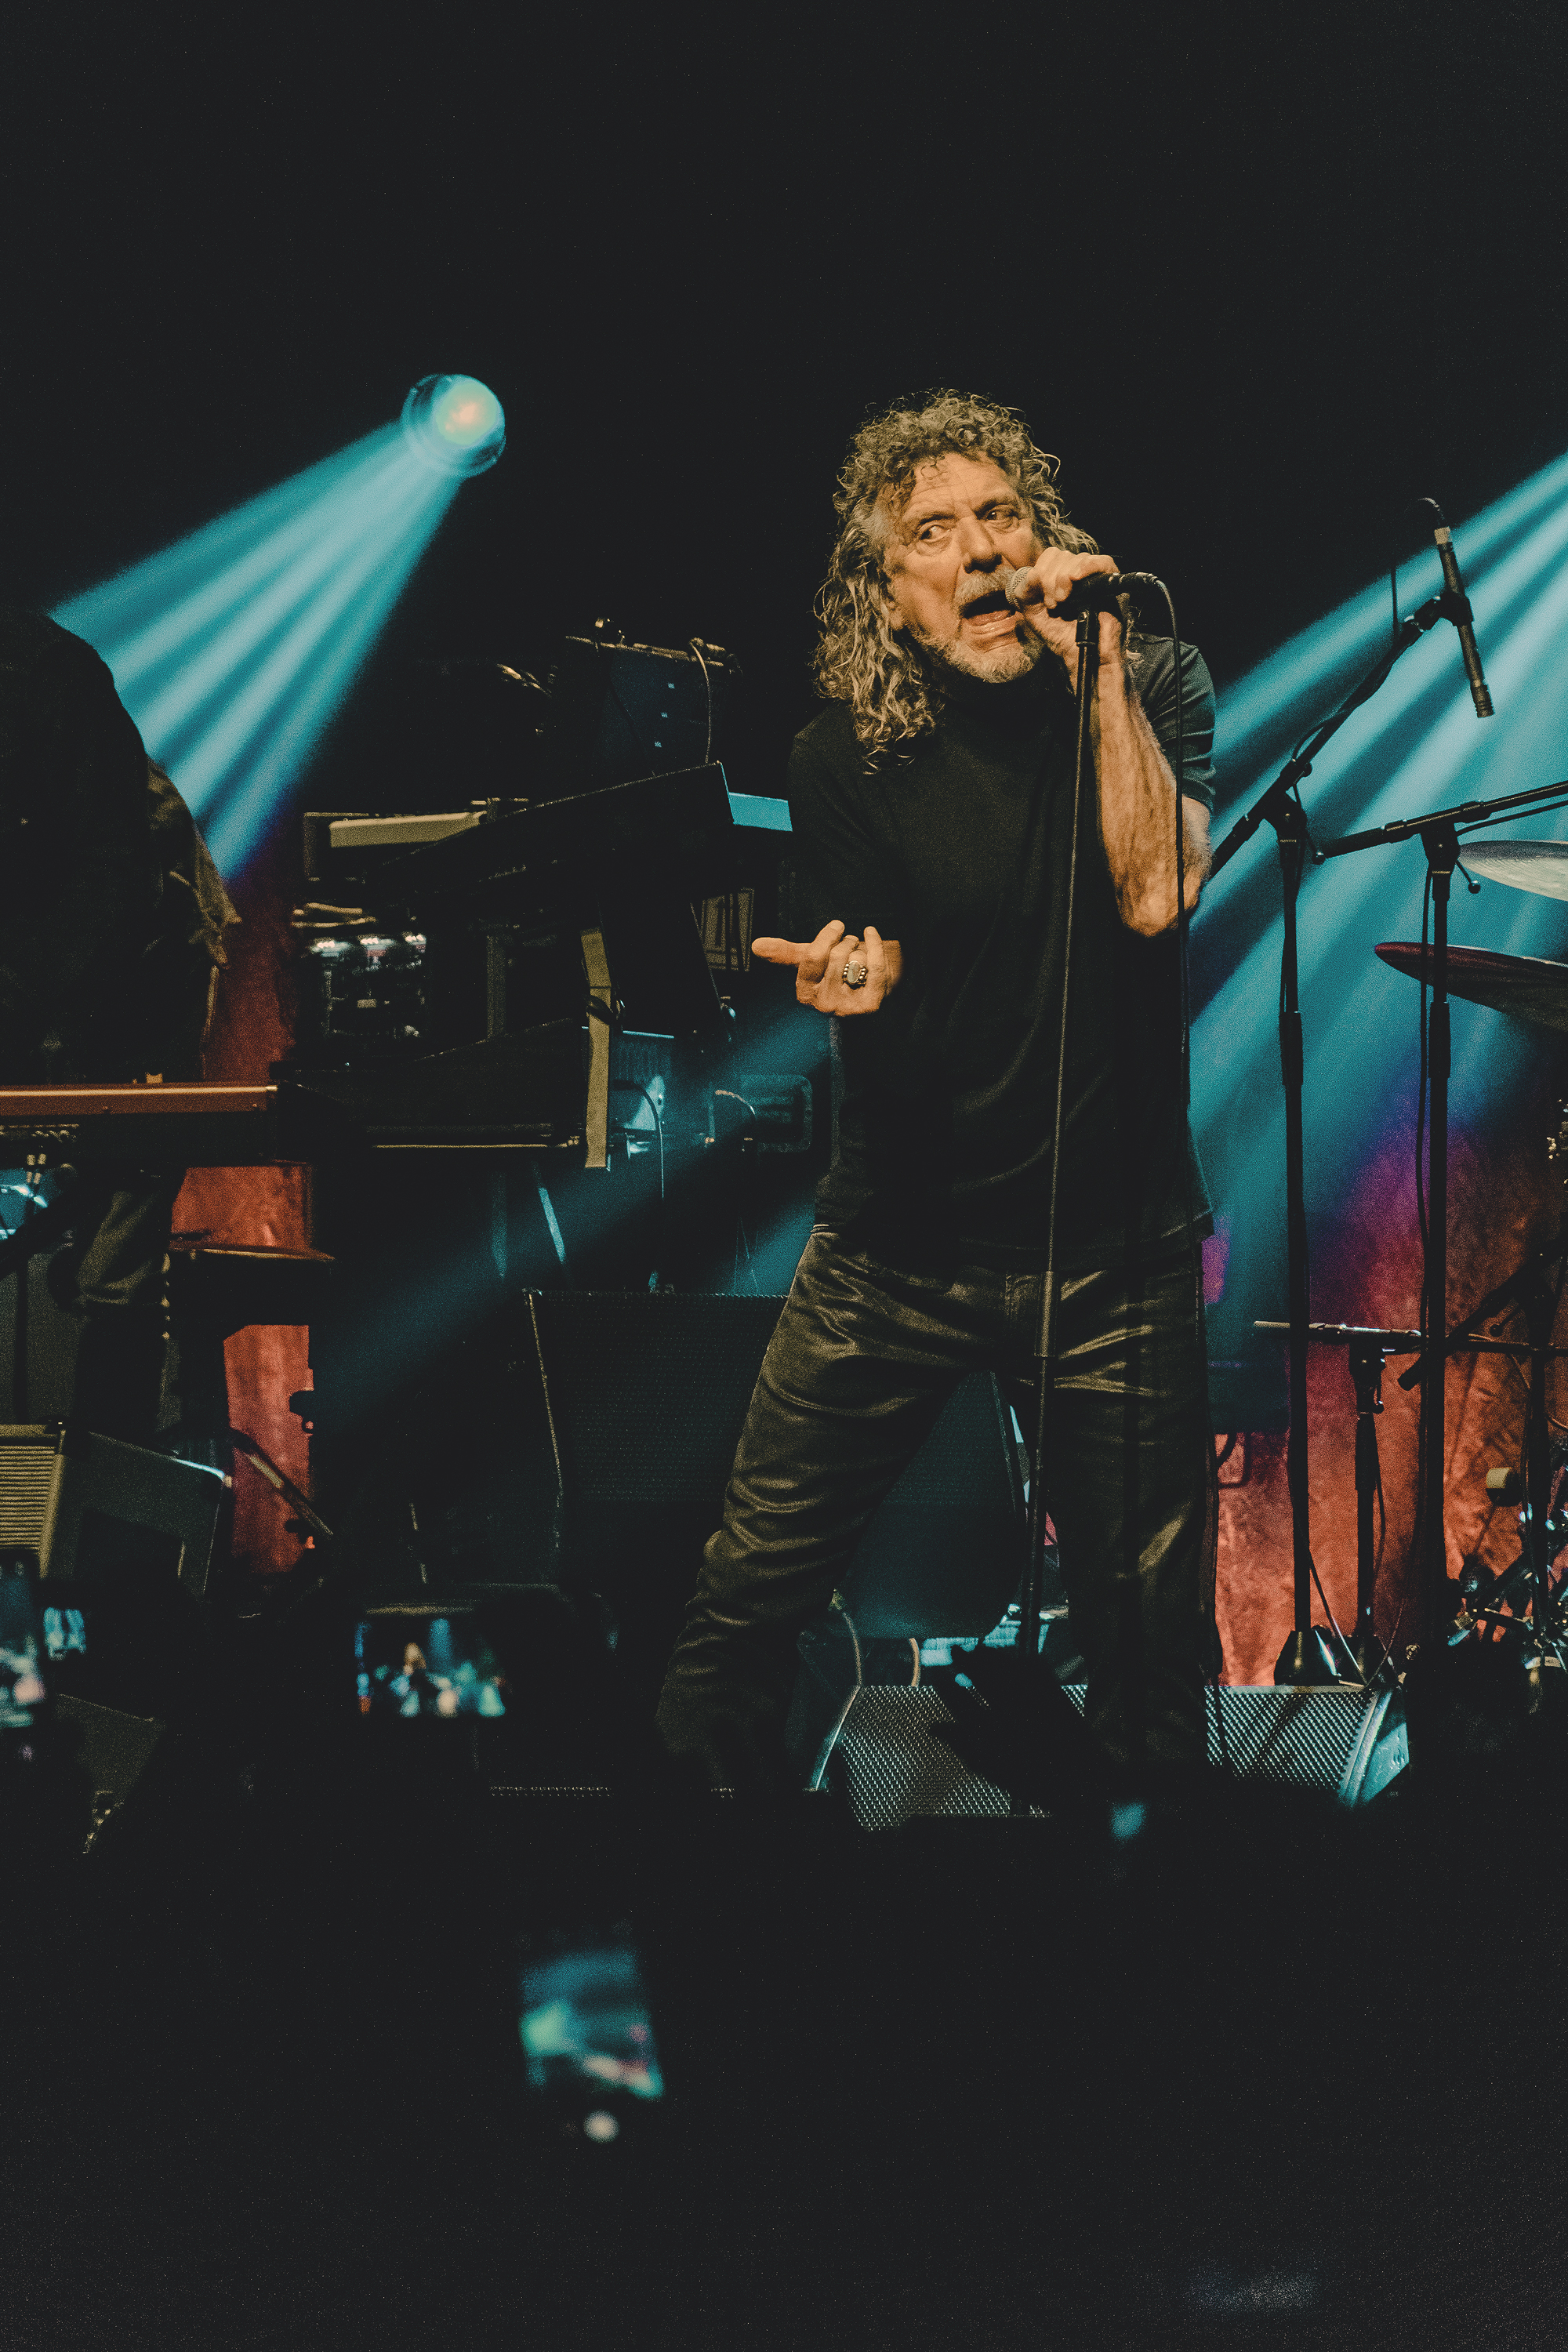 PHOTO: Robert Plant performing at the Moody Theater in Austin, TX Oct. 1. Photo by The Signal reporter Regan Bjerkeli.